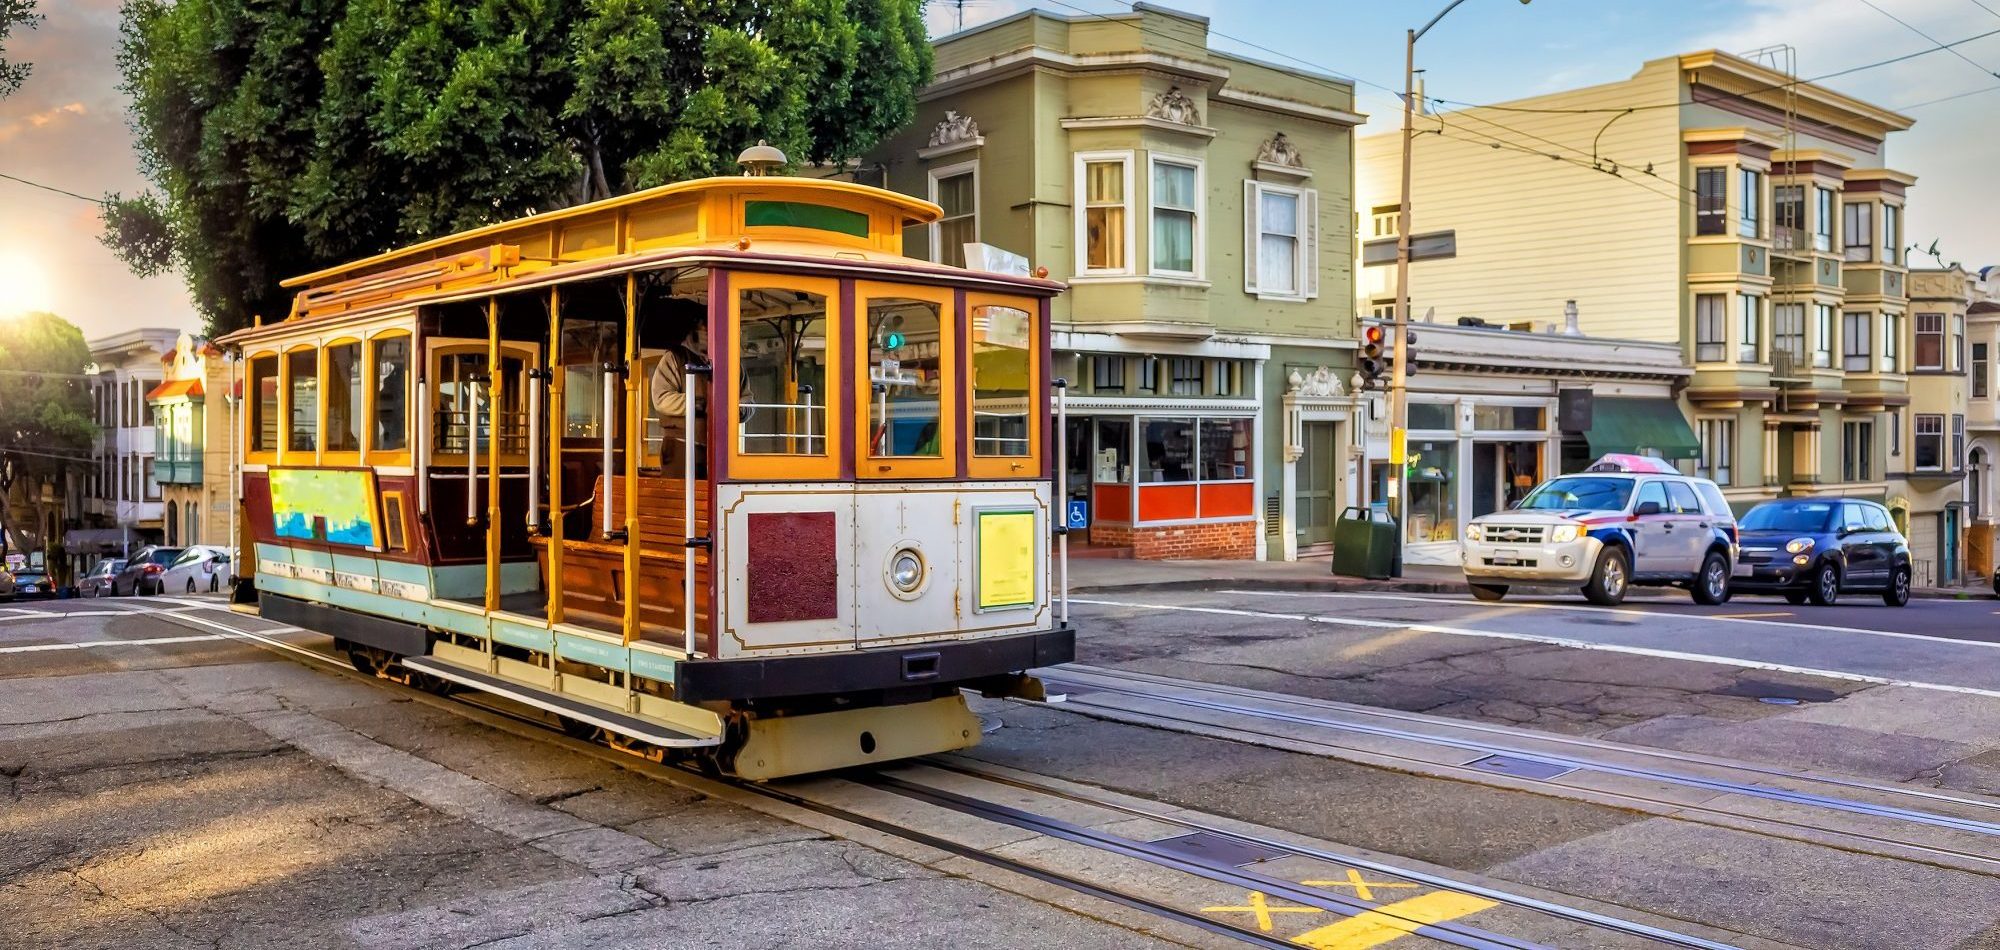 An image of a San Francisco street car. If you have been discriminated against, contact the San Francisco discrimination attorneys at The Law Office of Jeannette Vaccaro.